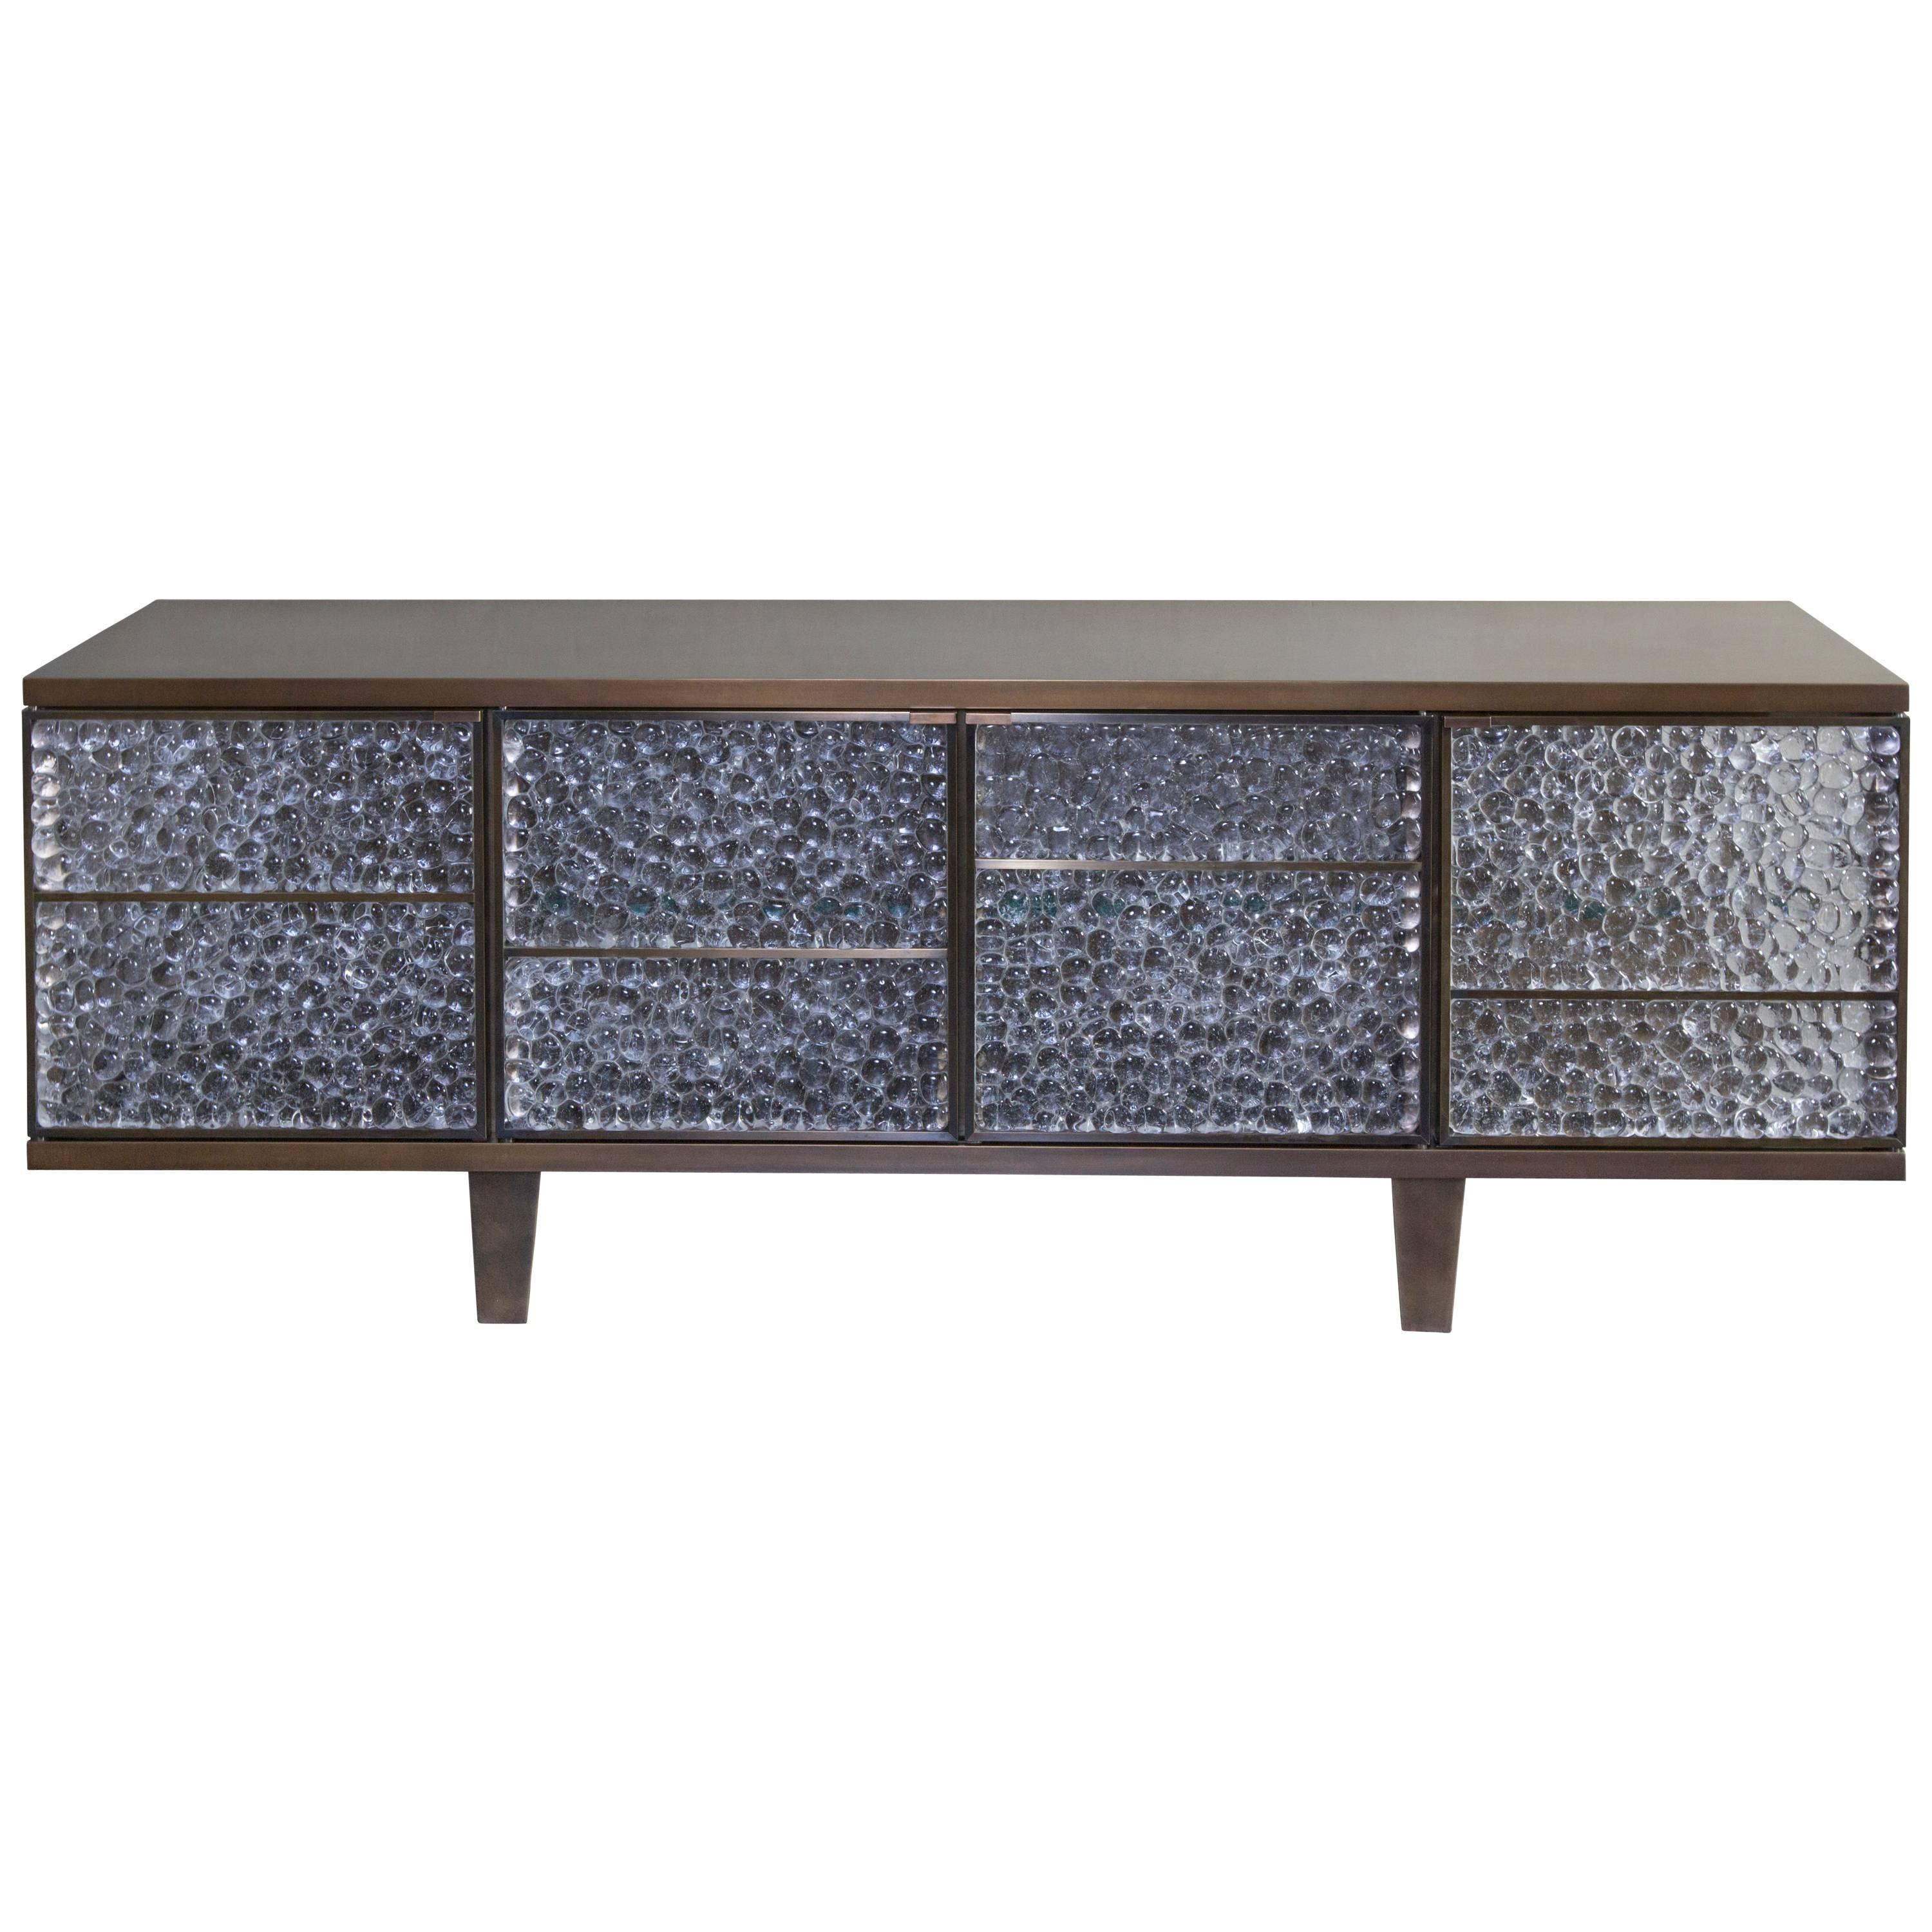 "Pepple" Sideboard by Atelier Stefan Leo for Flair Florence